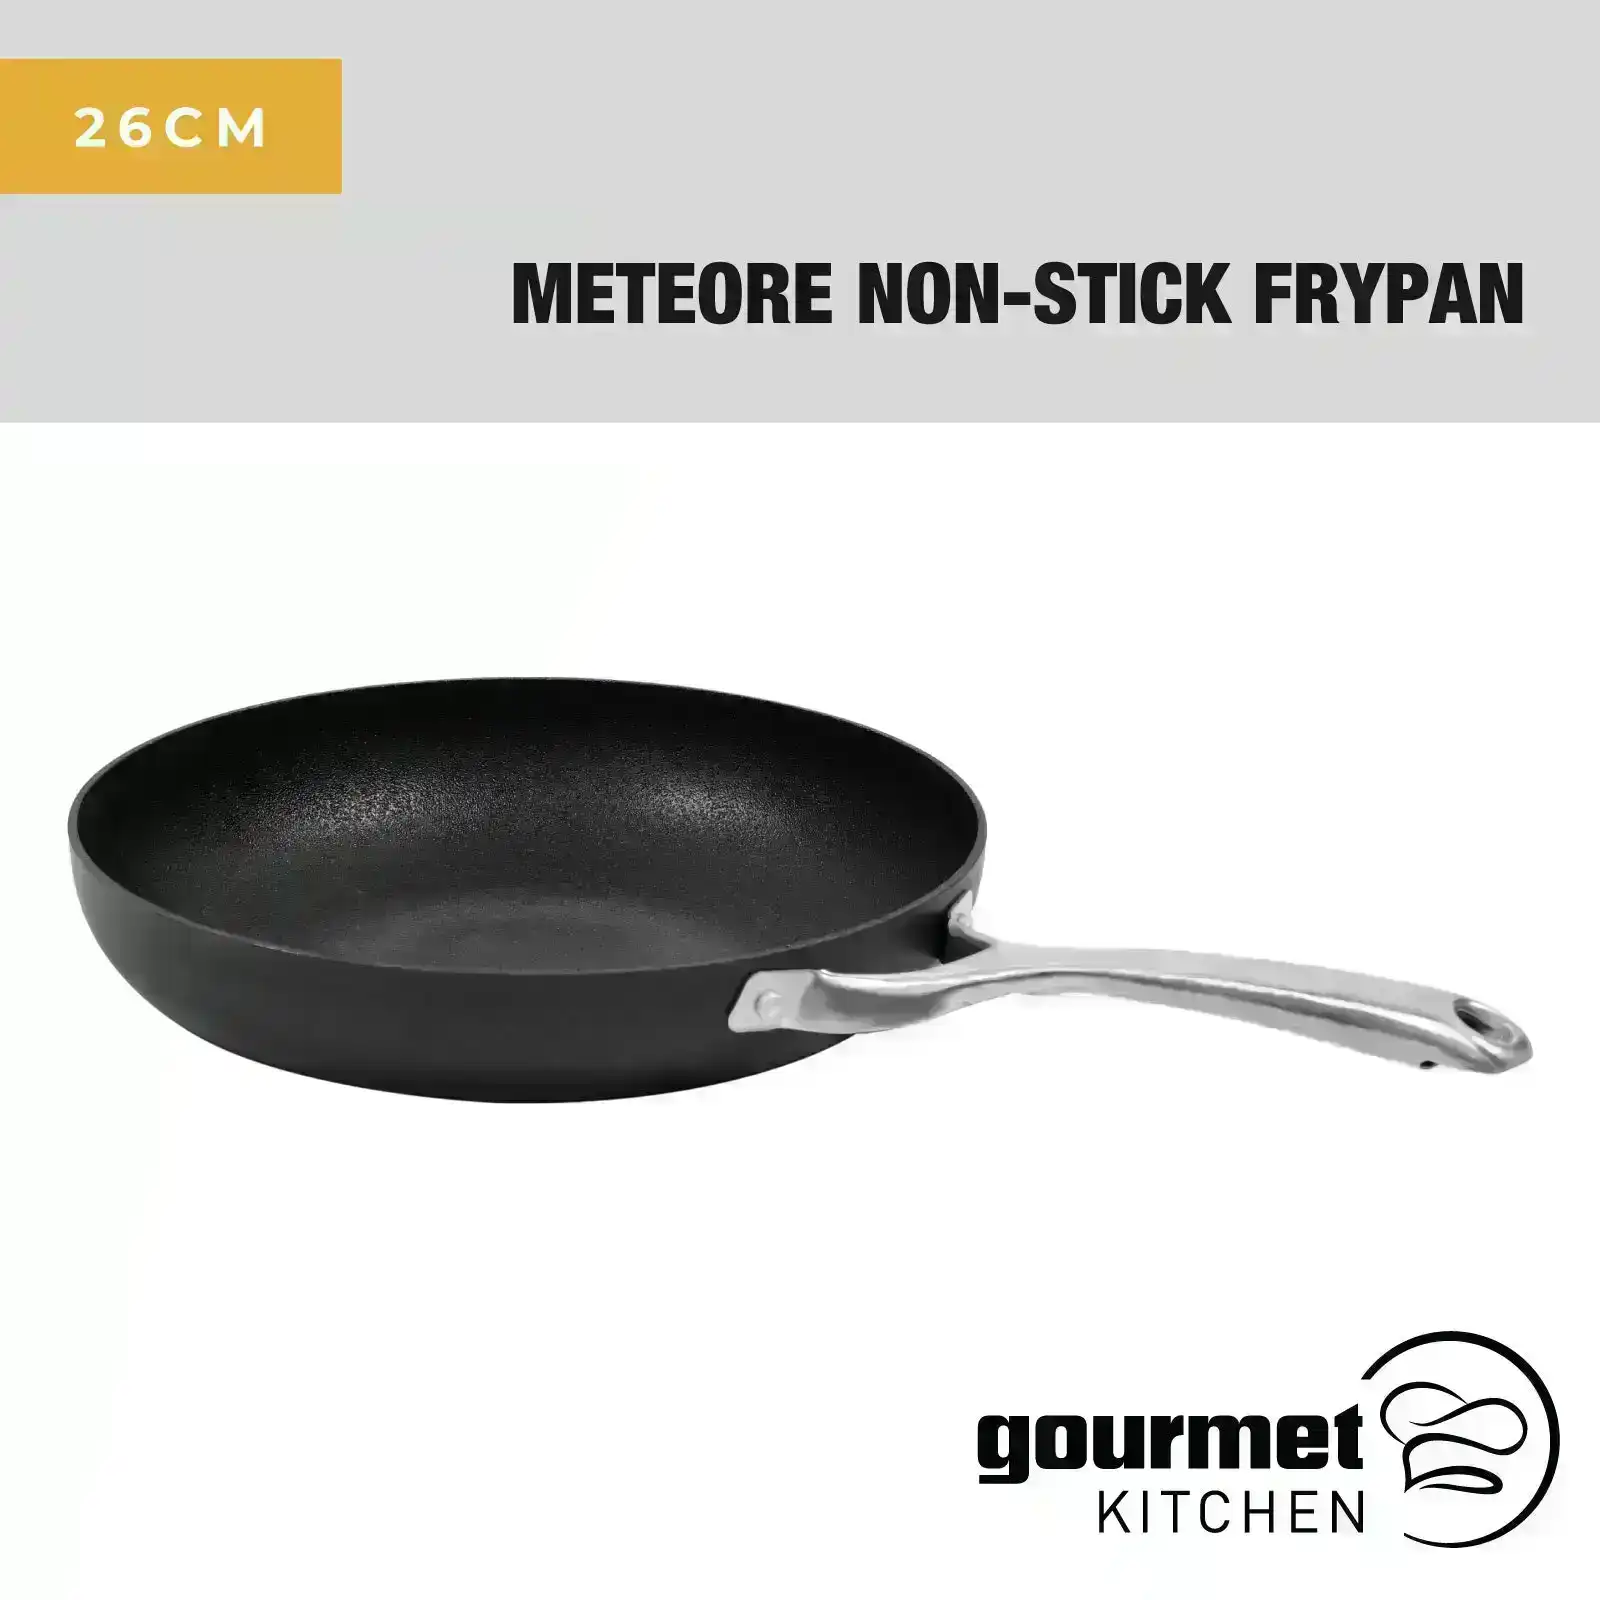 Gourmet Kitchen Meteore Non-Stick Frypan Black with Silver Handle 26cm